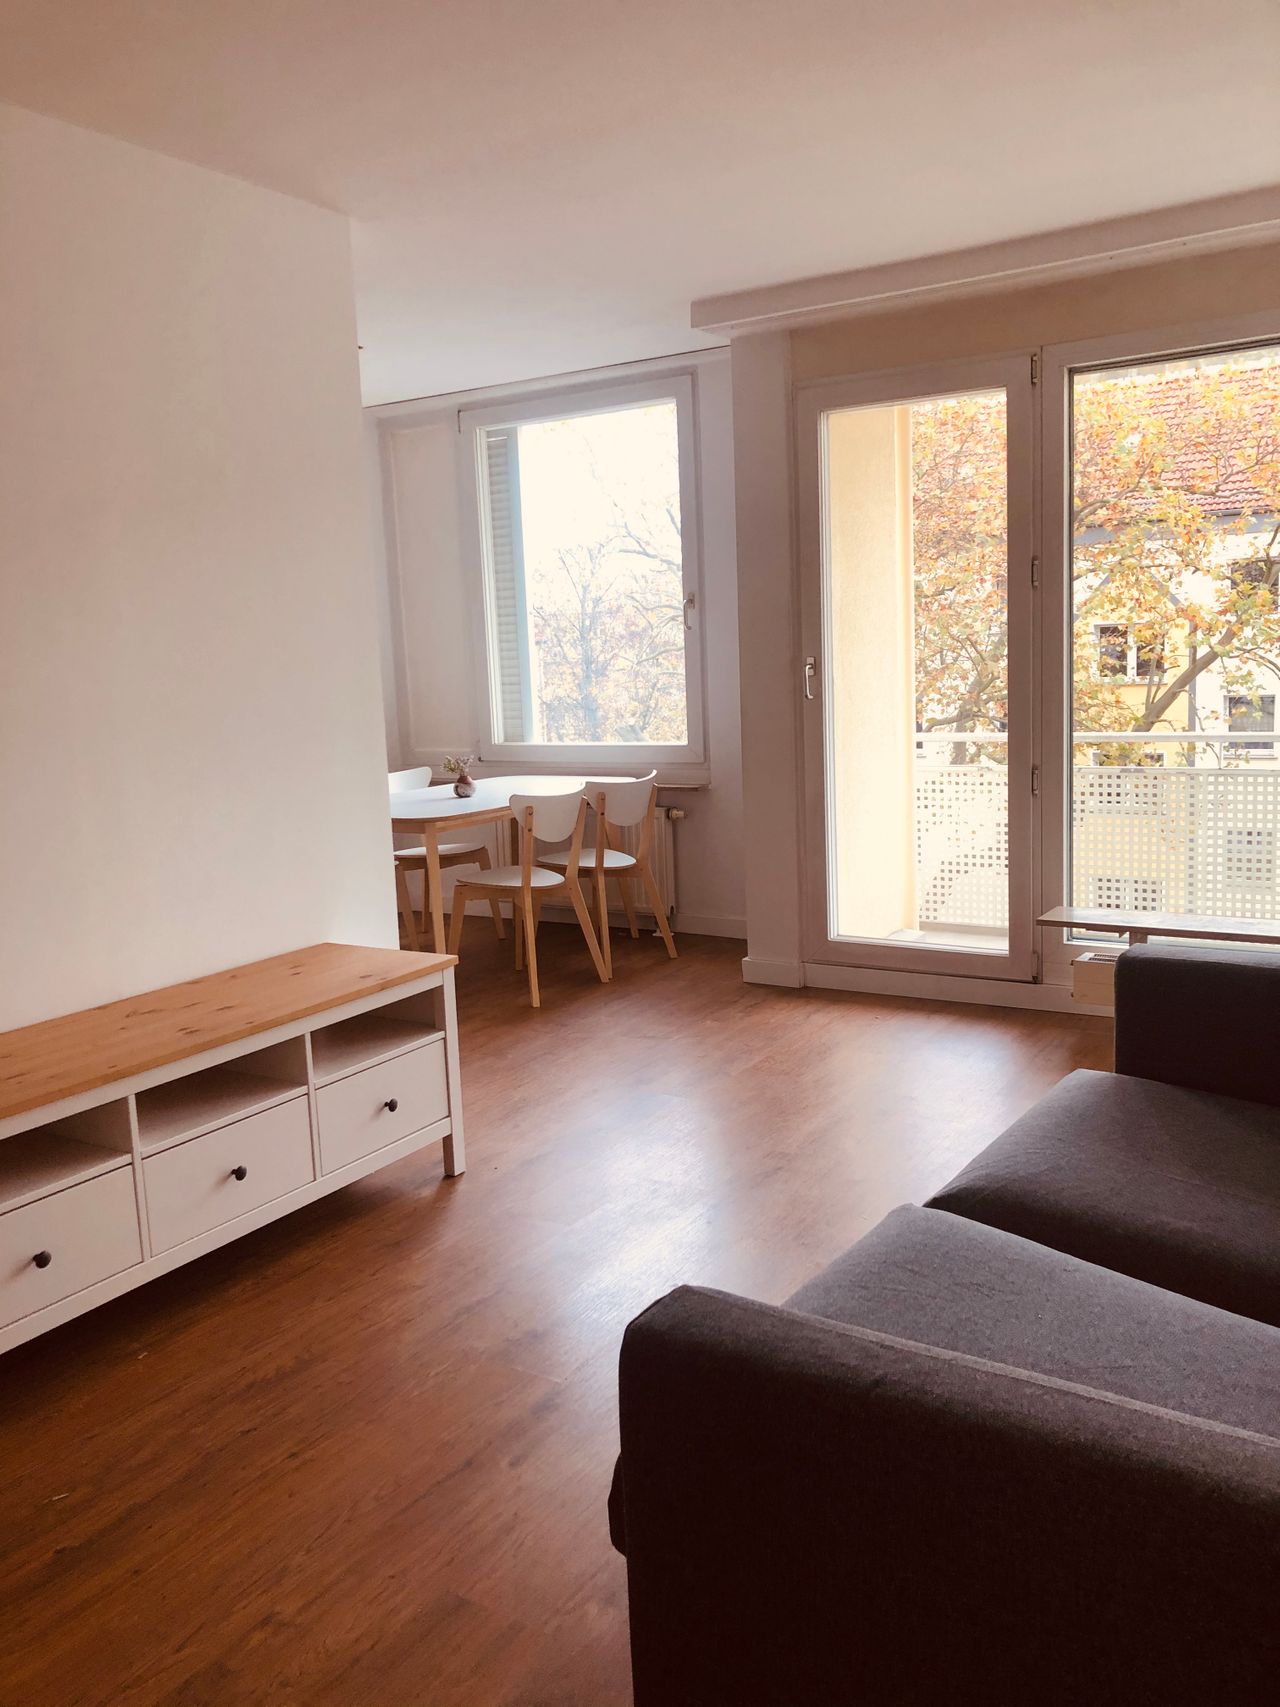 Bright, fully furnished apartment located in Wilhelmsruh